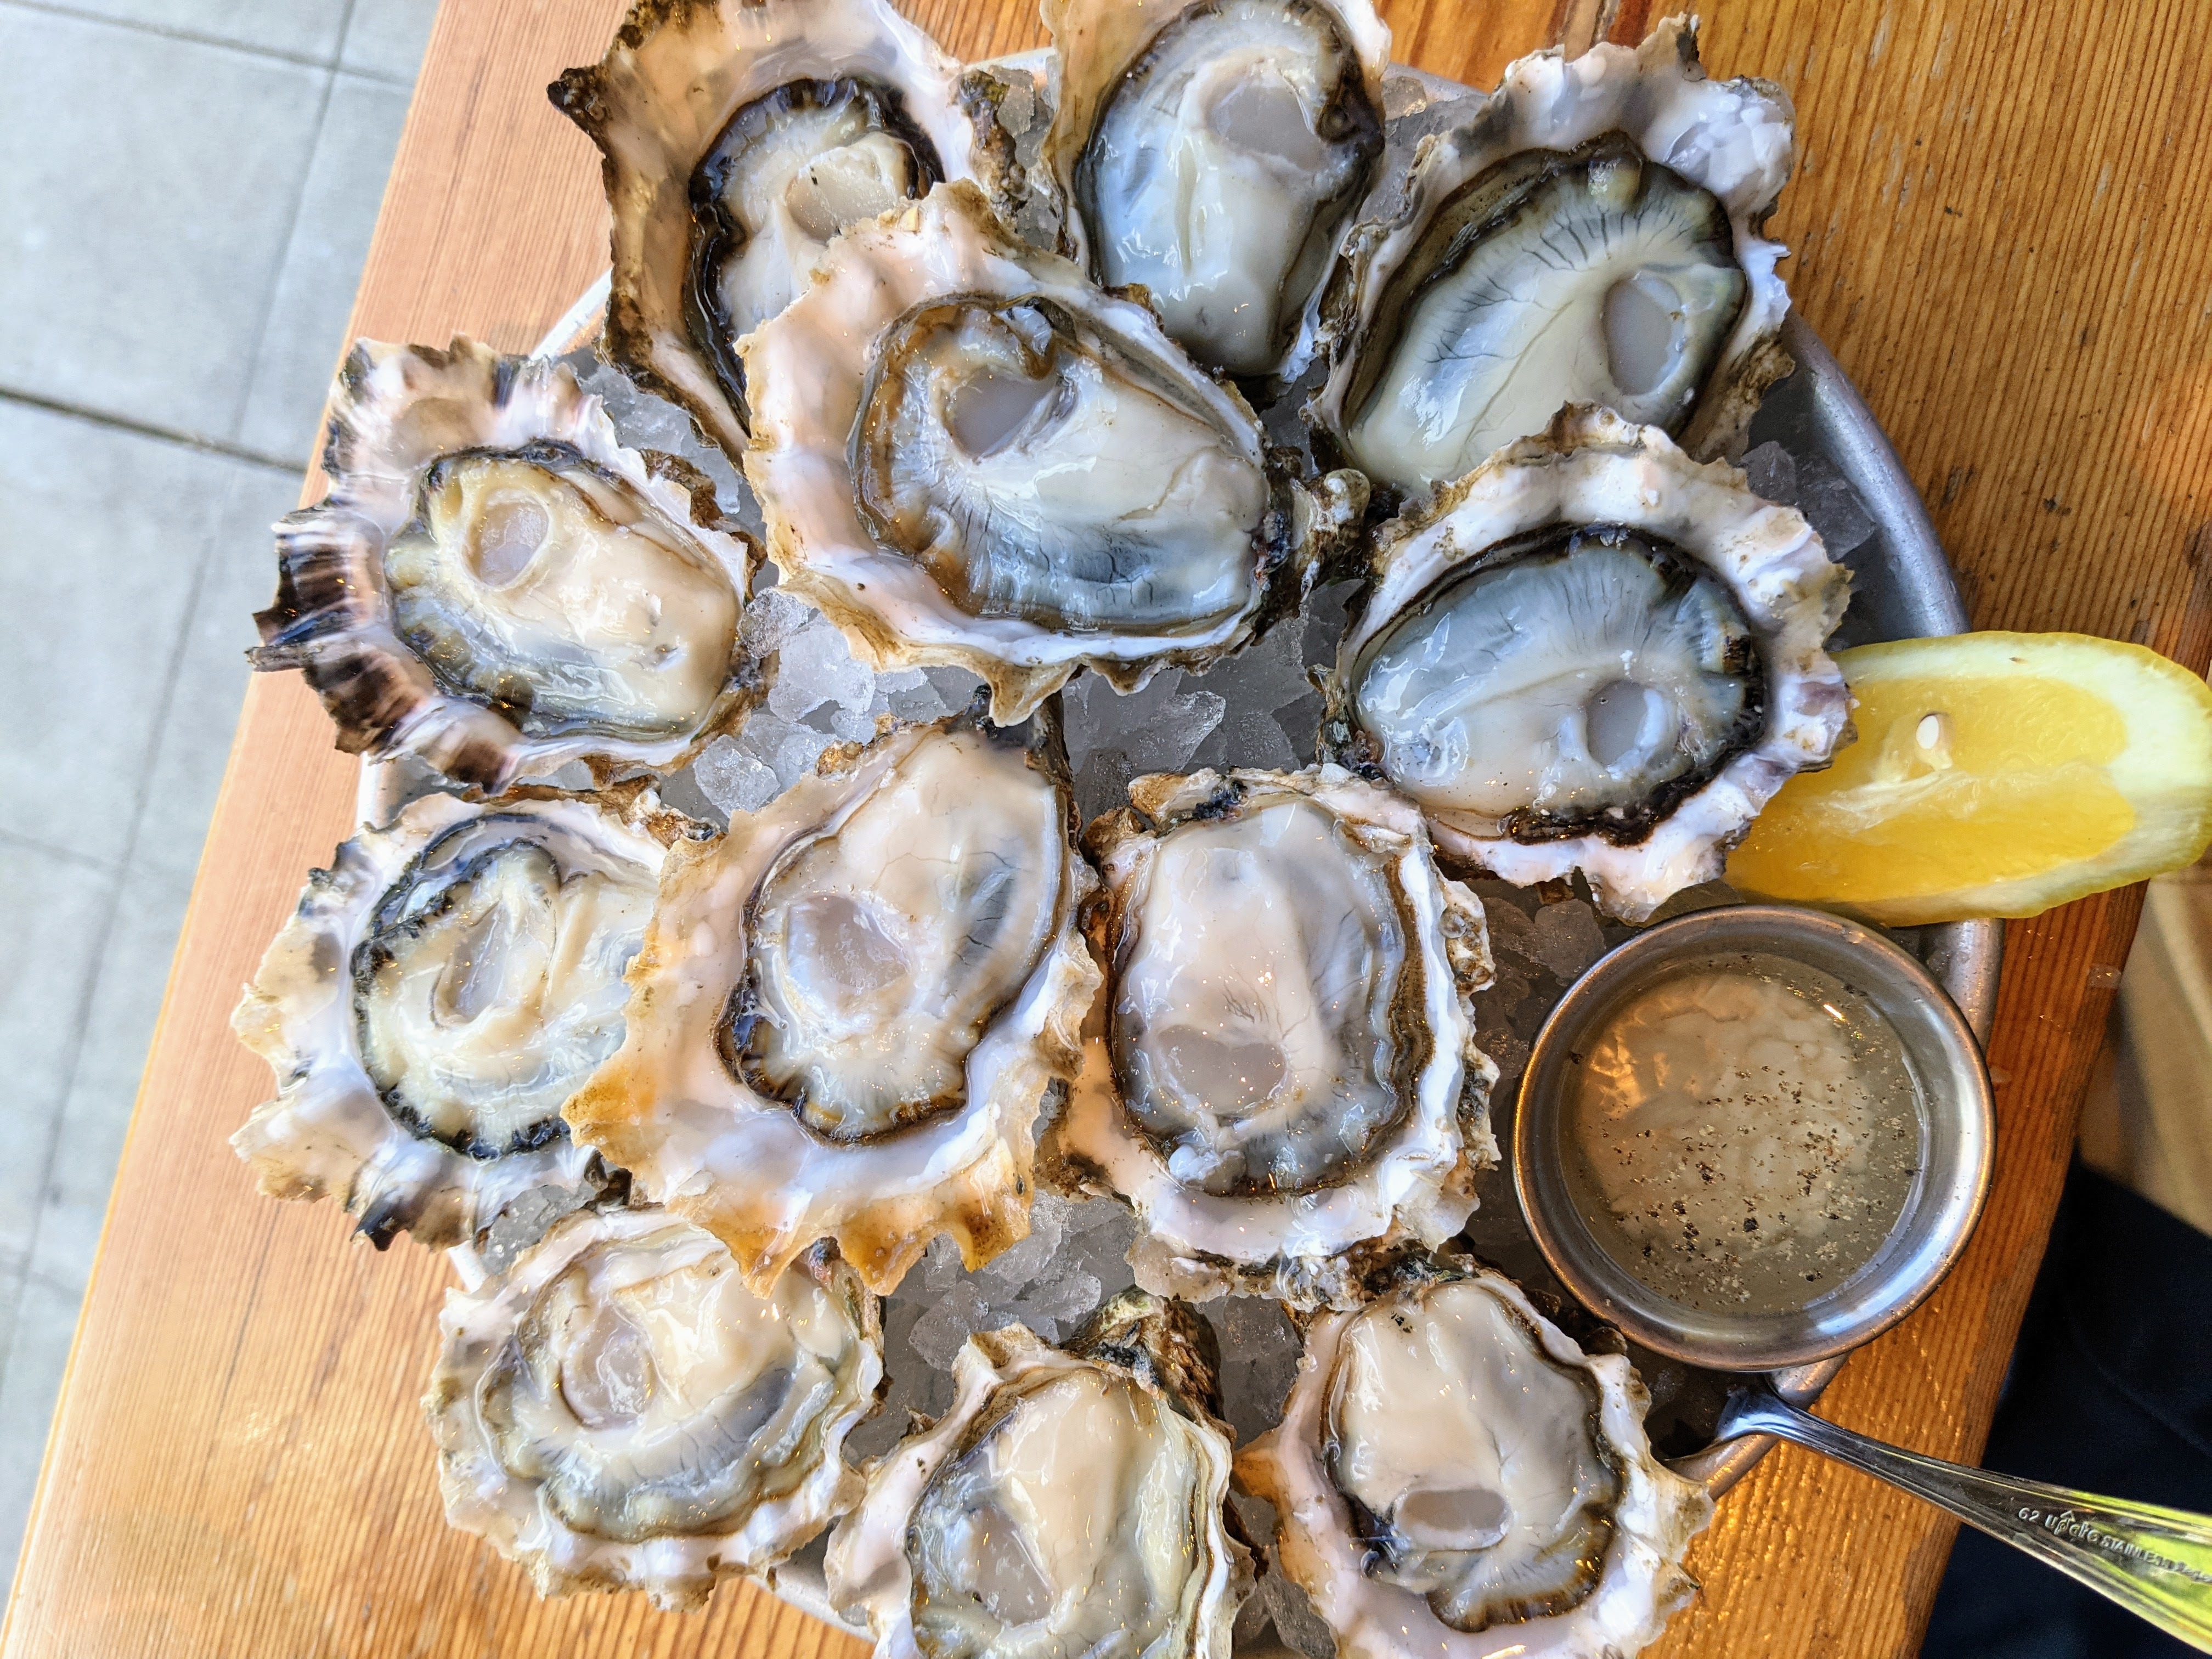 Raw oysters with mignonette sauce and lemon over ice.